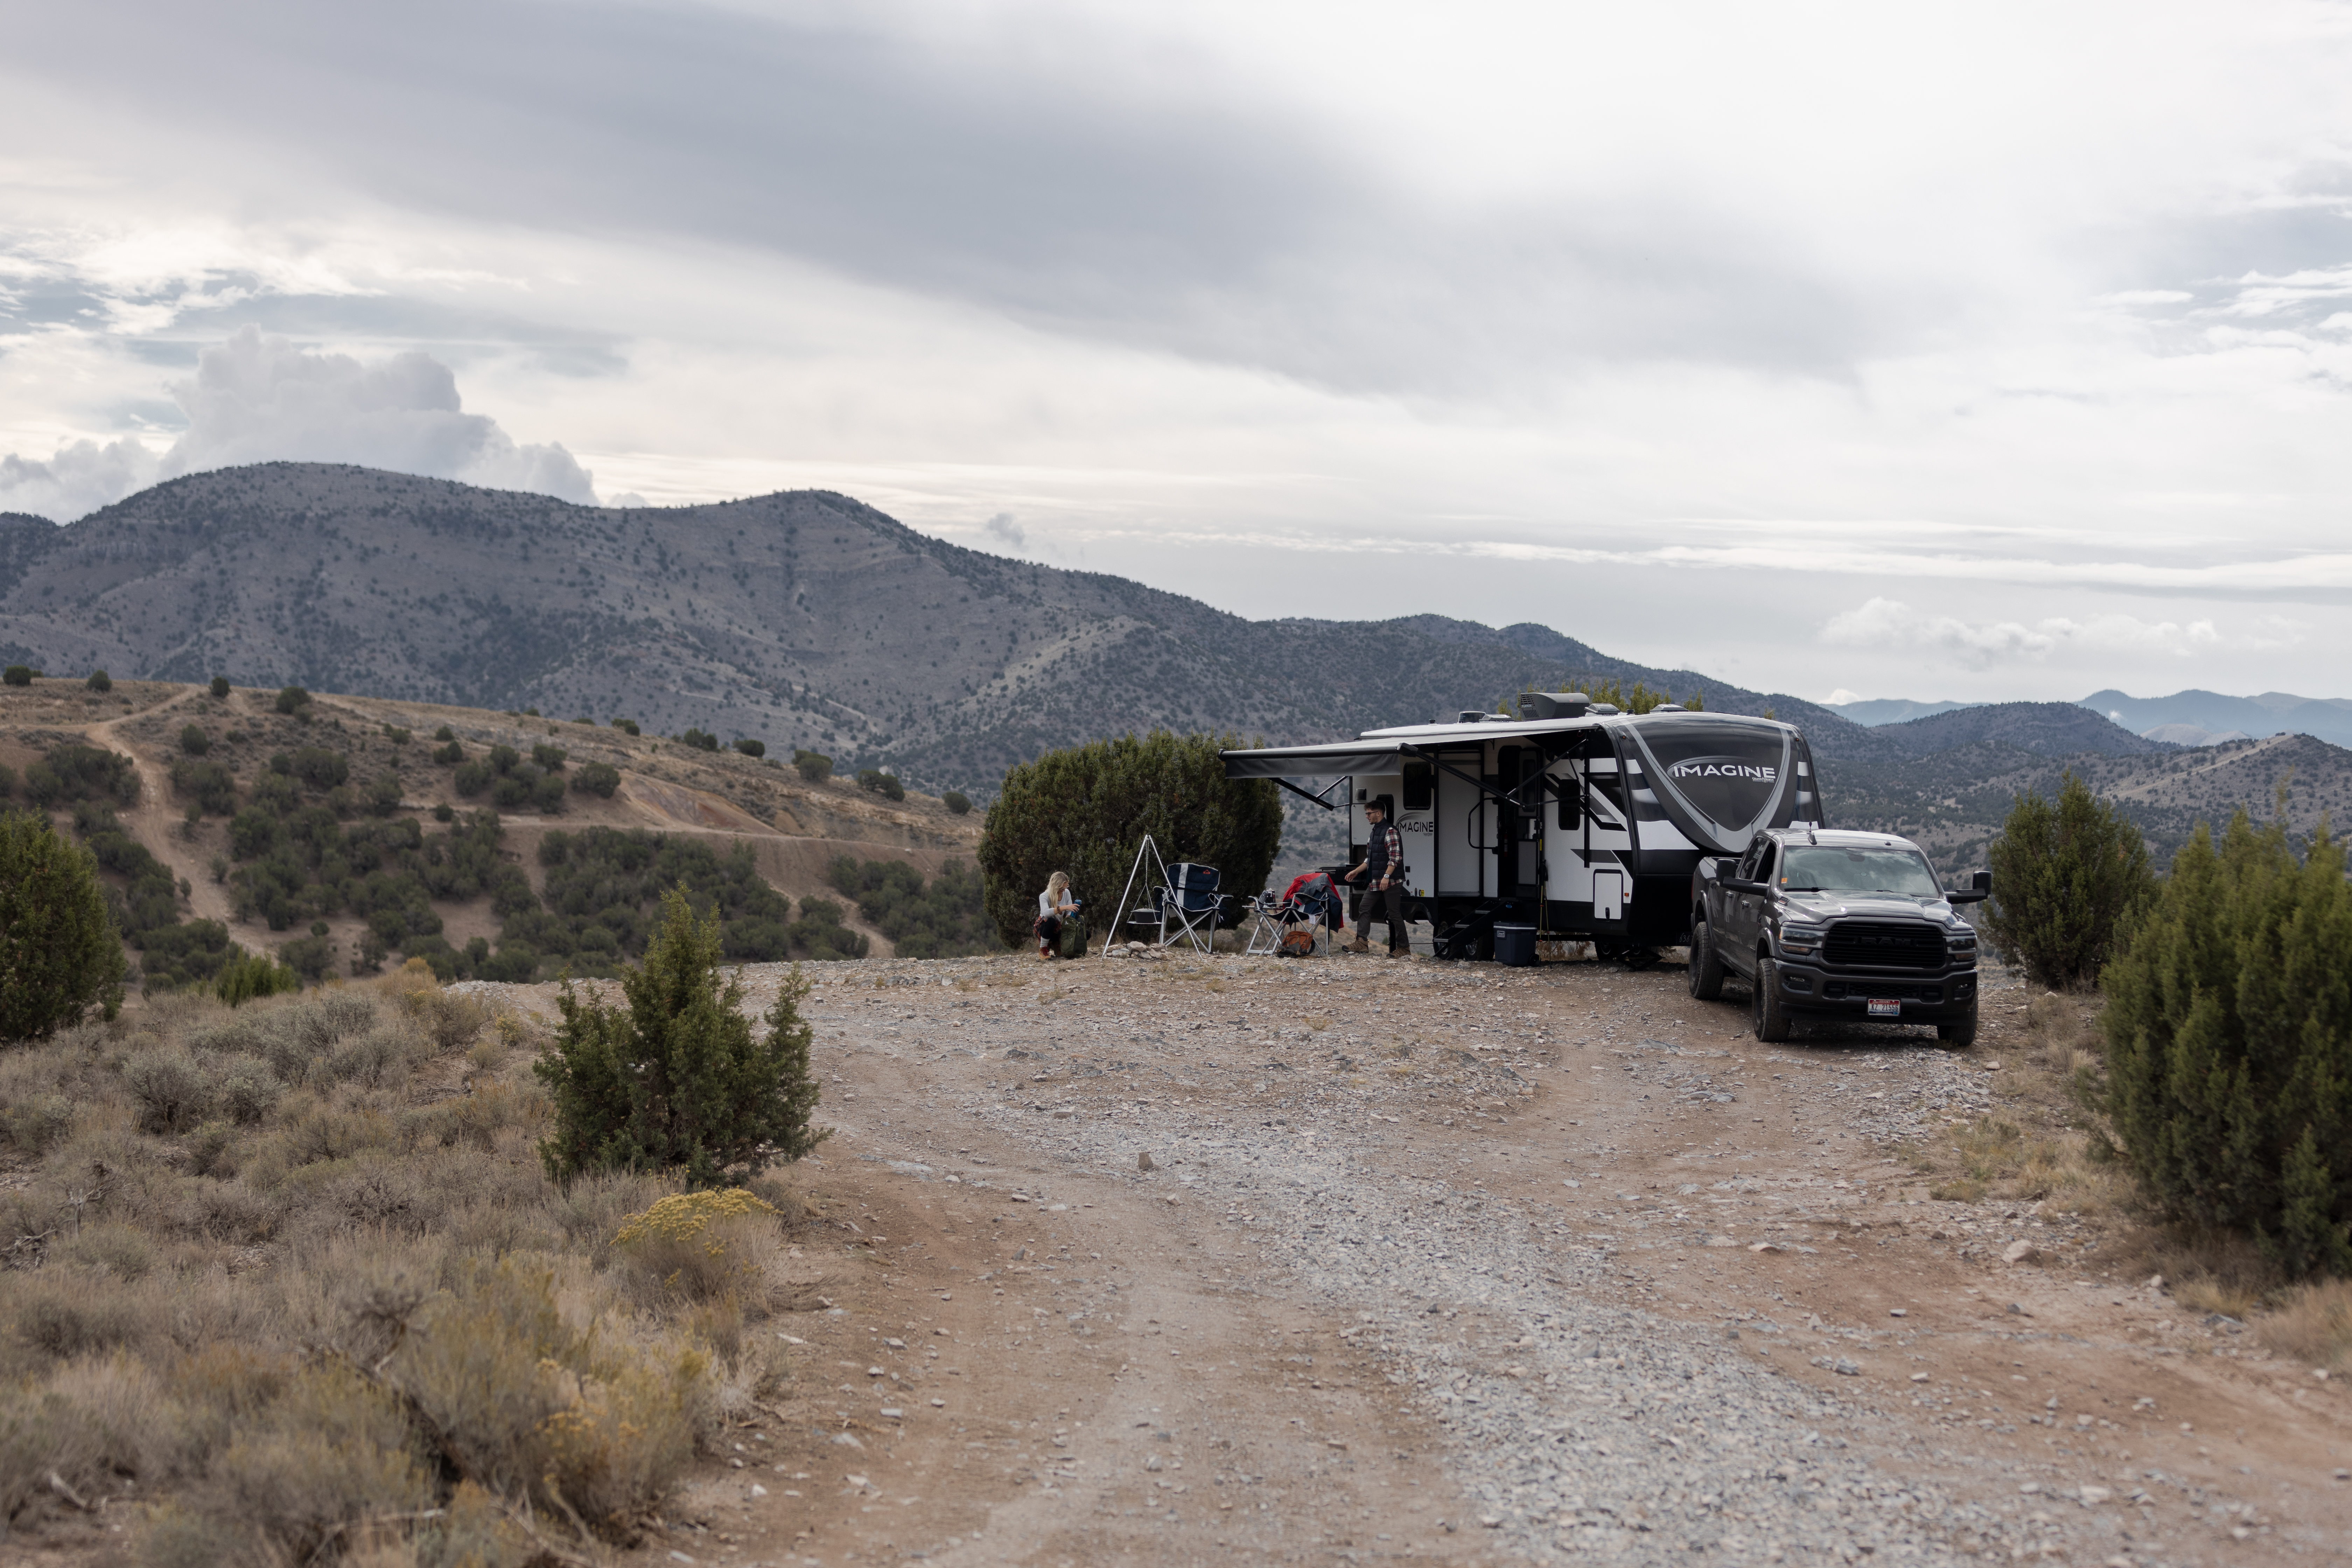 Adventure on a Dime: Camp for Free in These Moab RV Parks